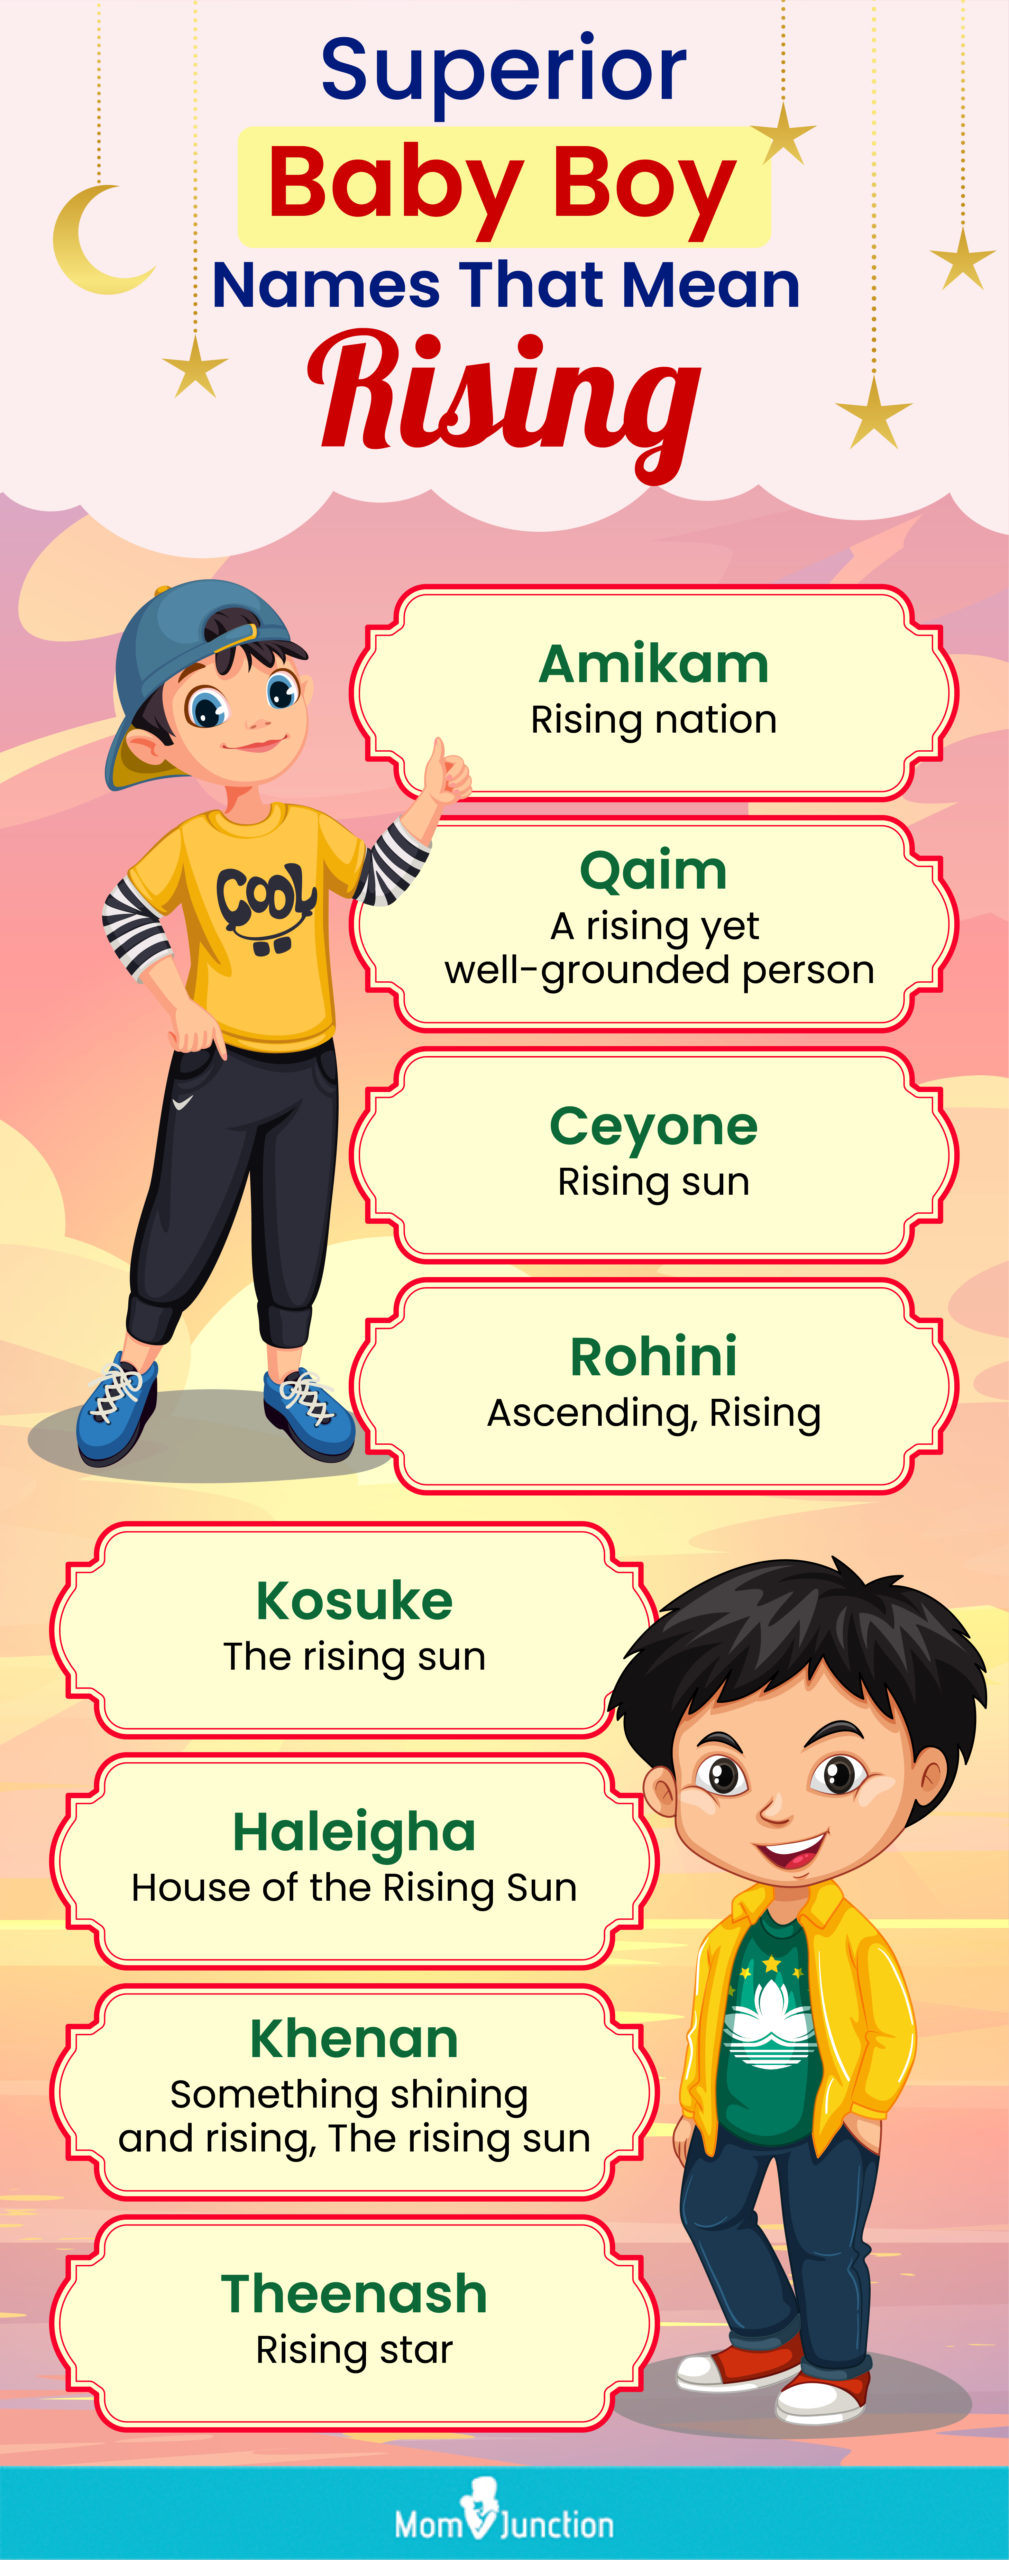 superior baby boy names that mean rising (infographic)